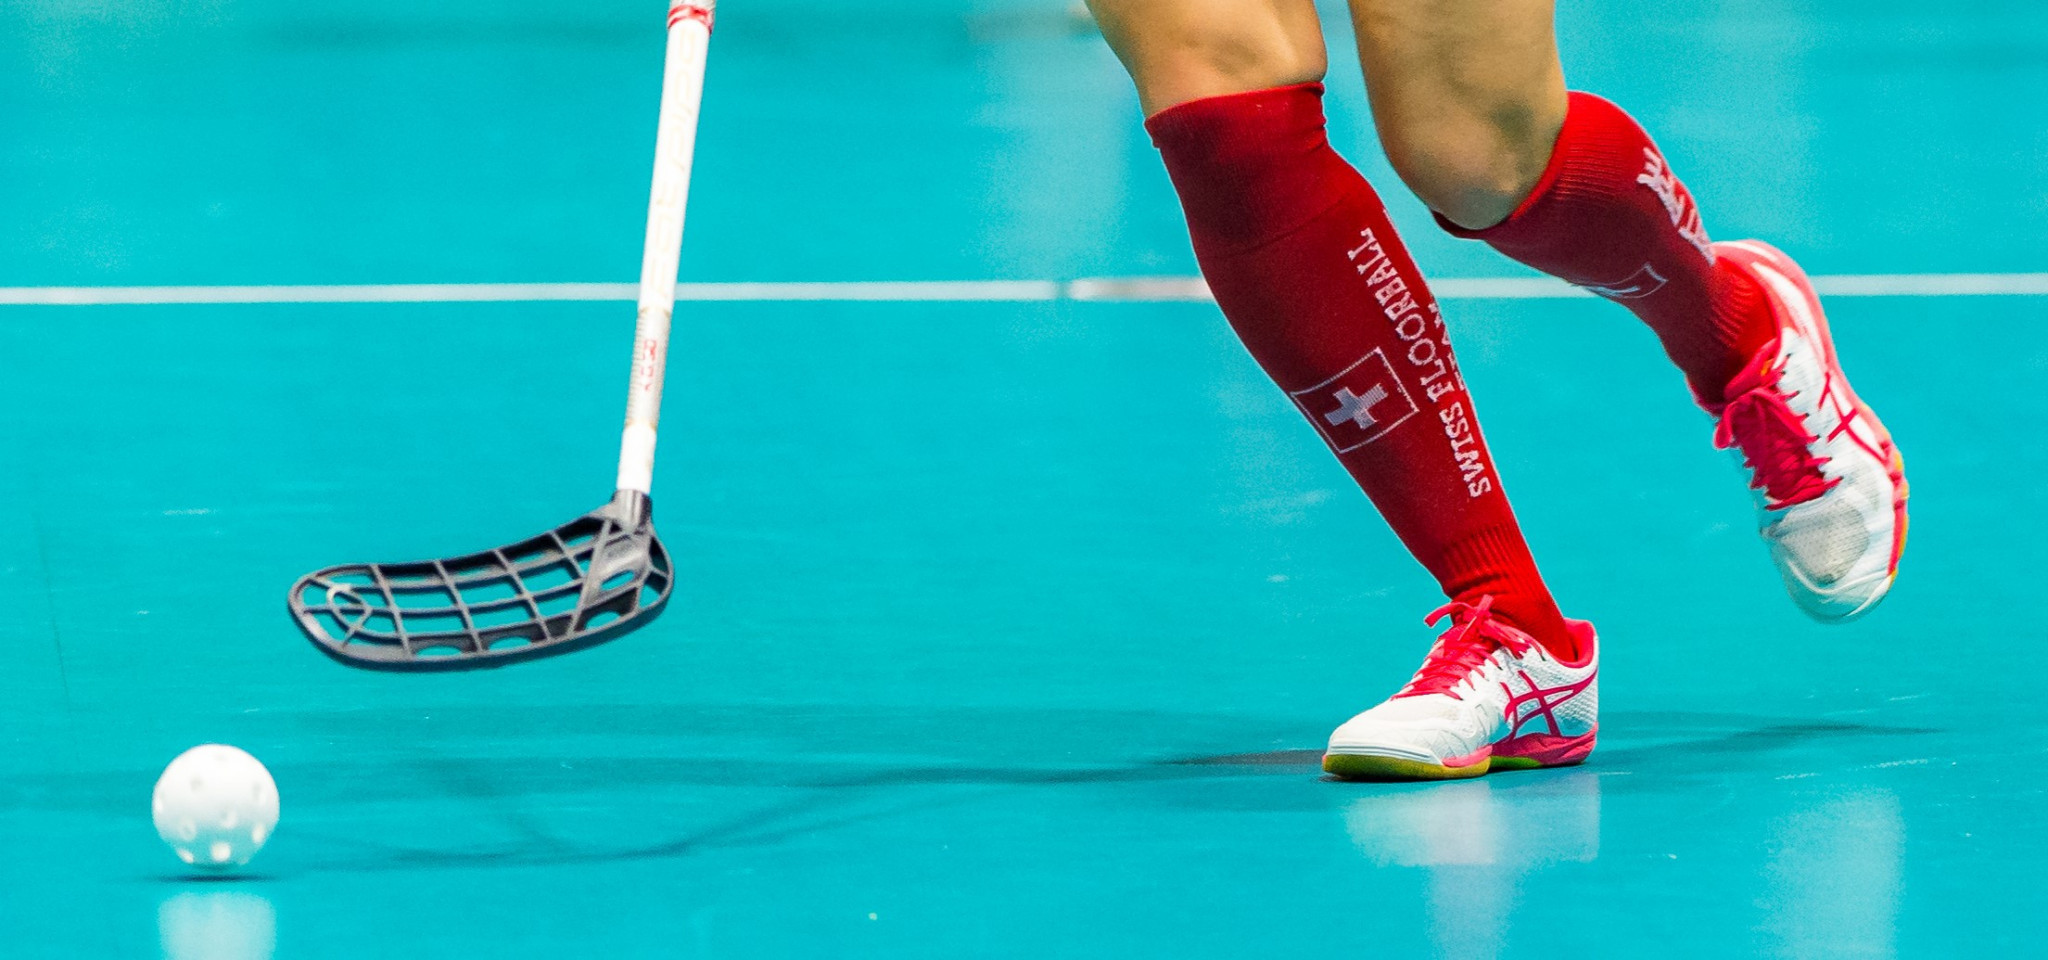 Womens Under-19 World Floorball Championship likely to be moved to September